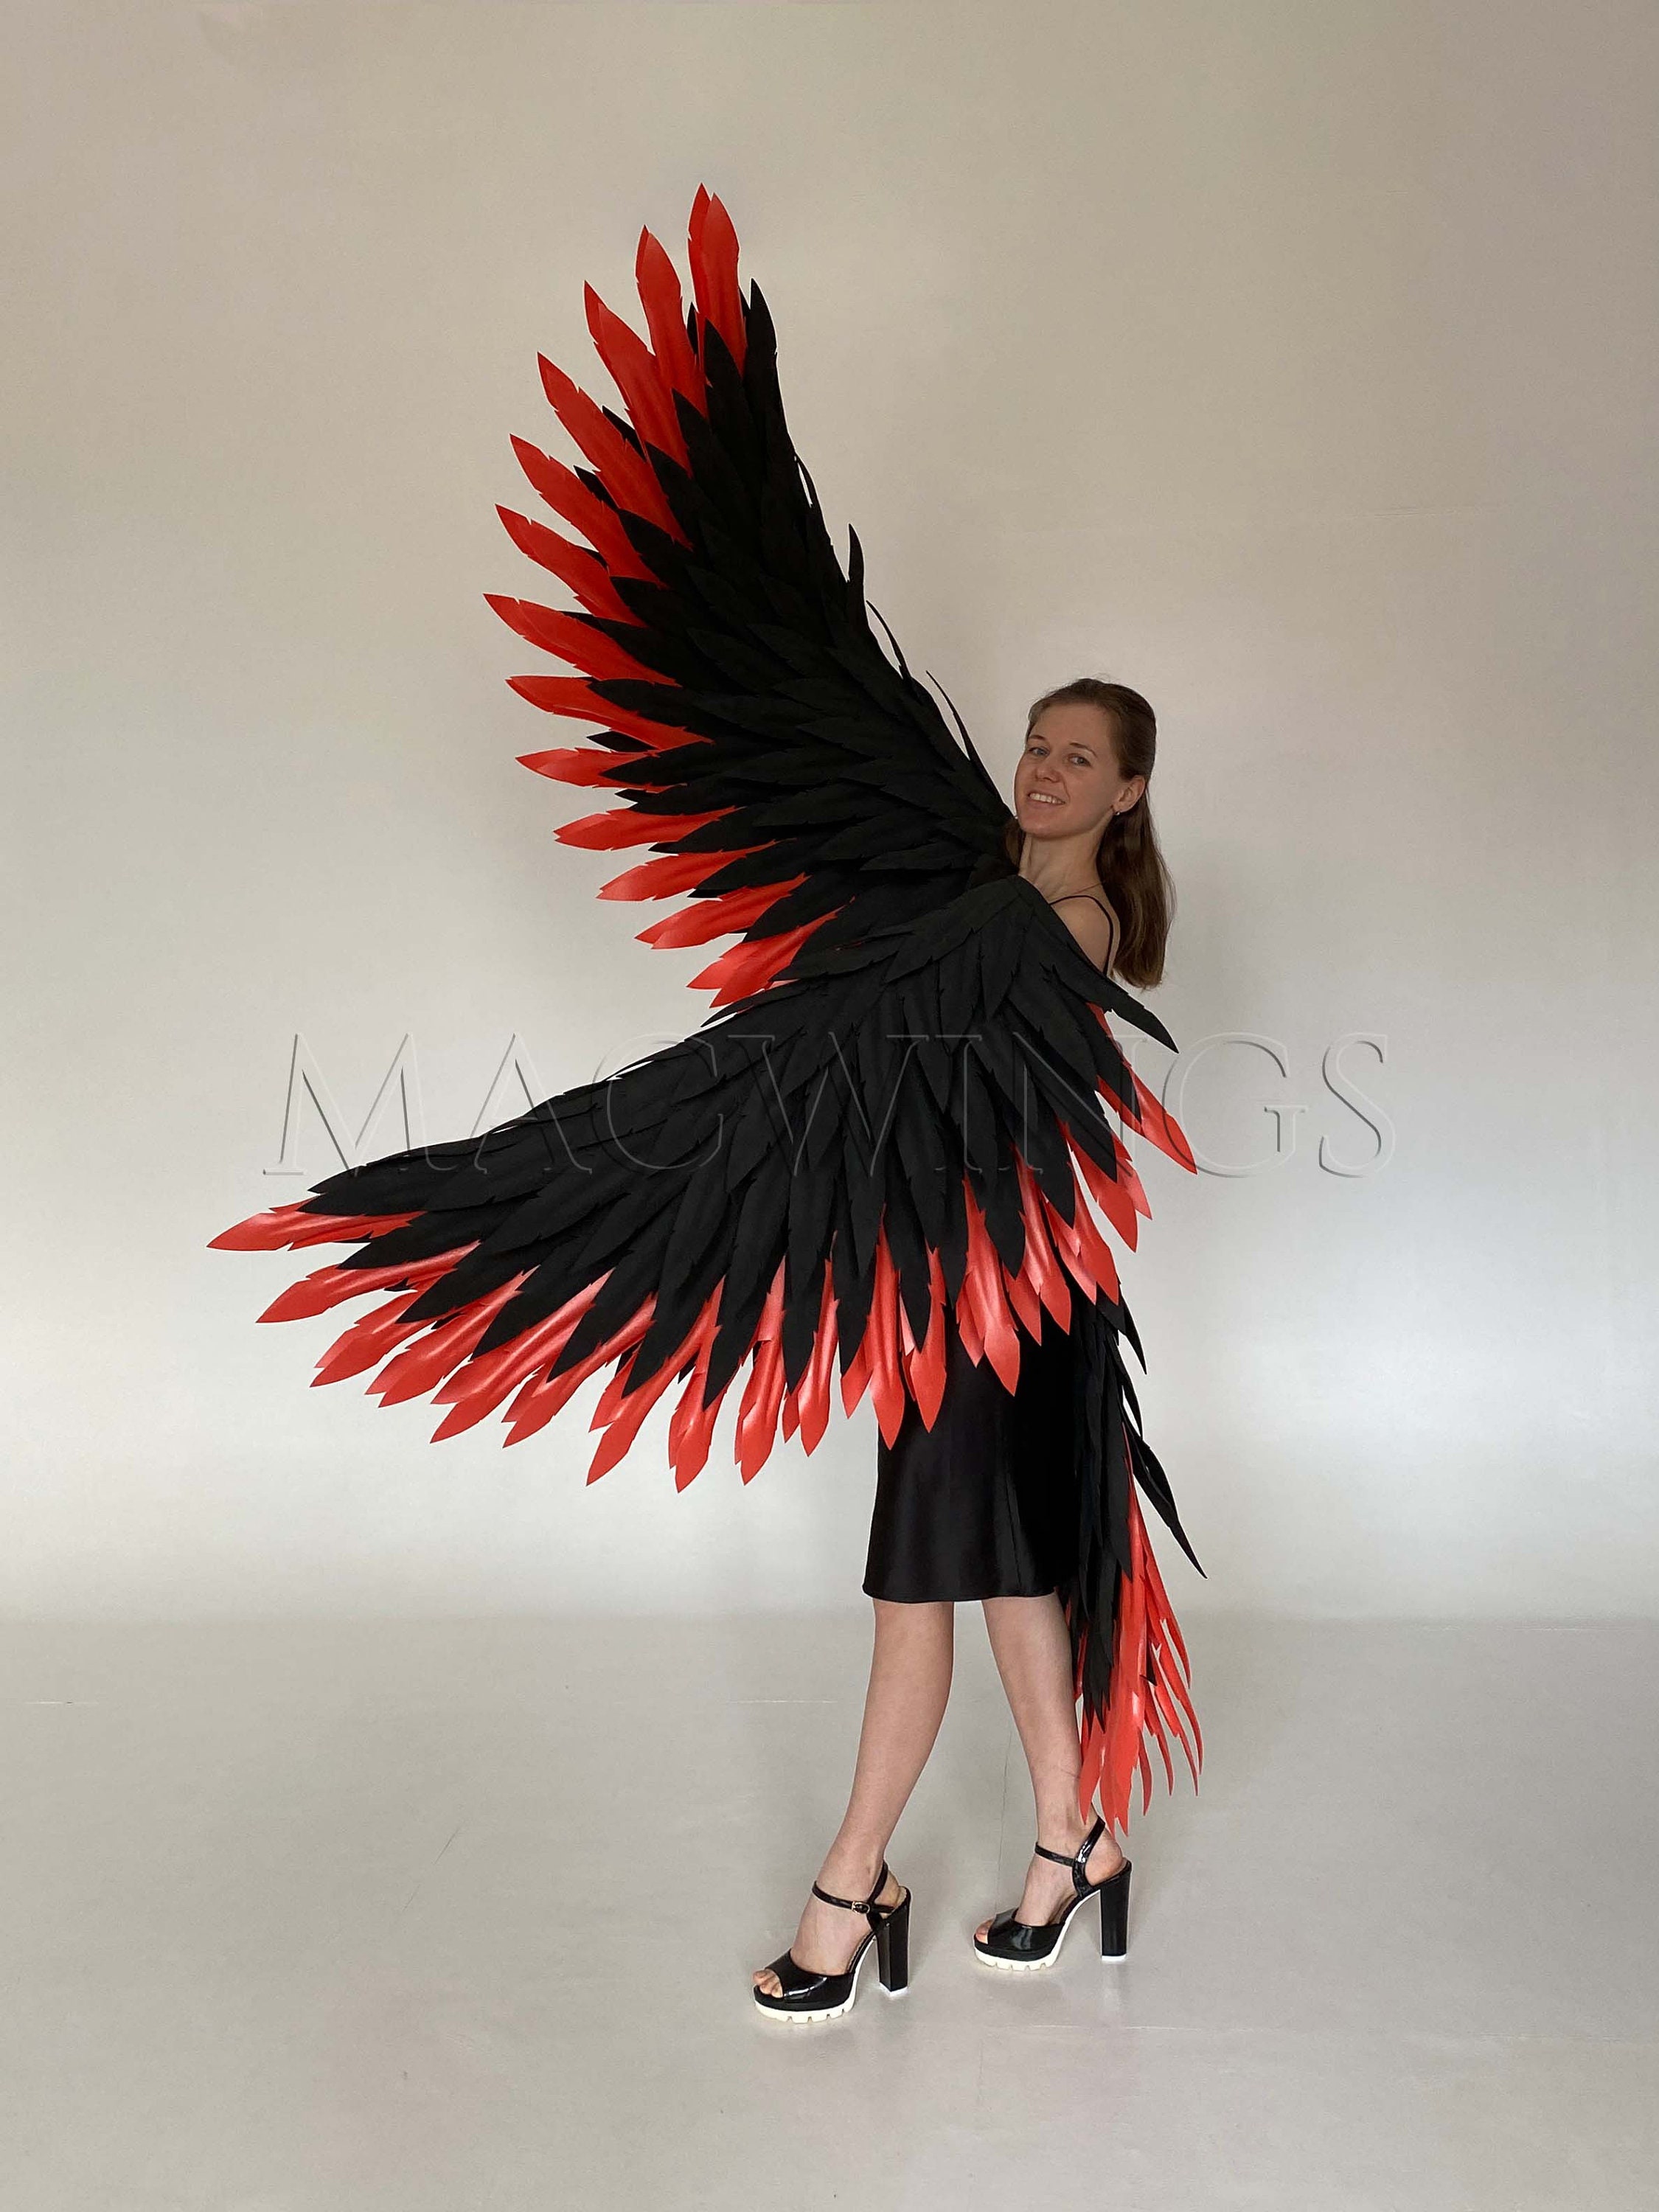 White Bird Wings and Tail, Bird Wings, Arm Wings, Bird Tail, Bird Costume  Cosplay, Harpy Costume, Flexible Wings for Arms, Halloween Costume 